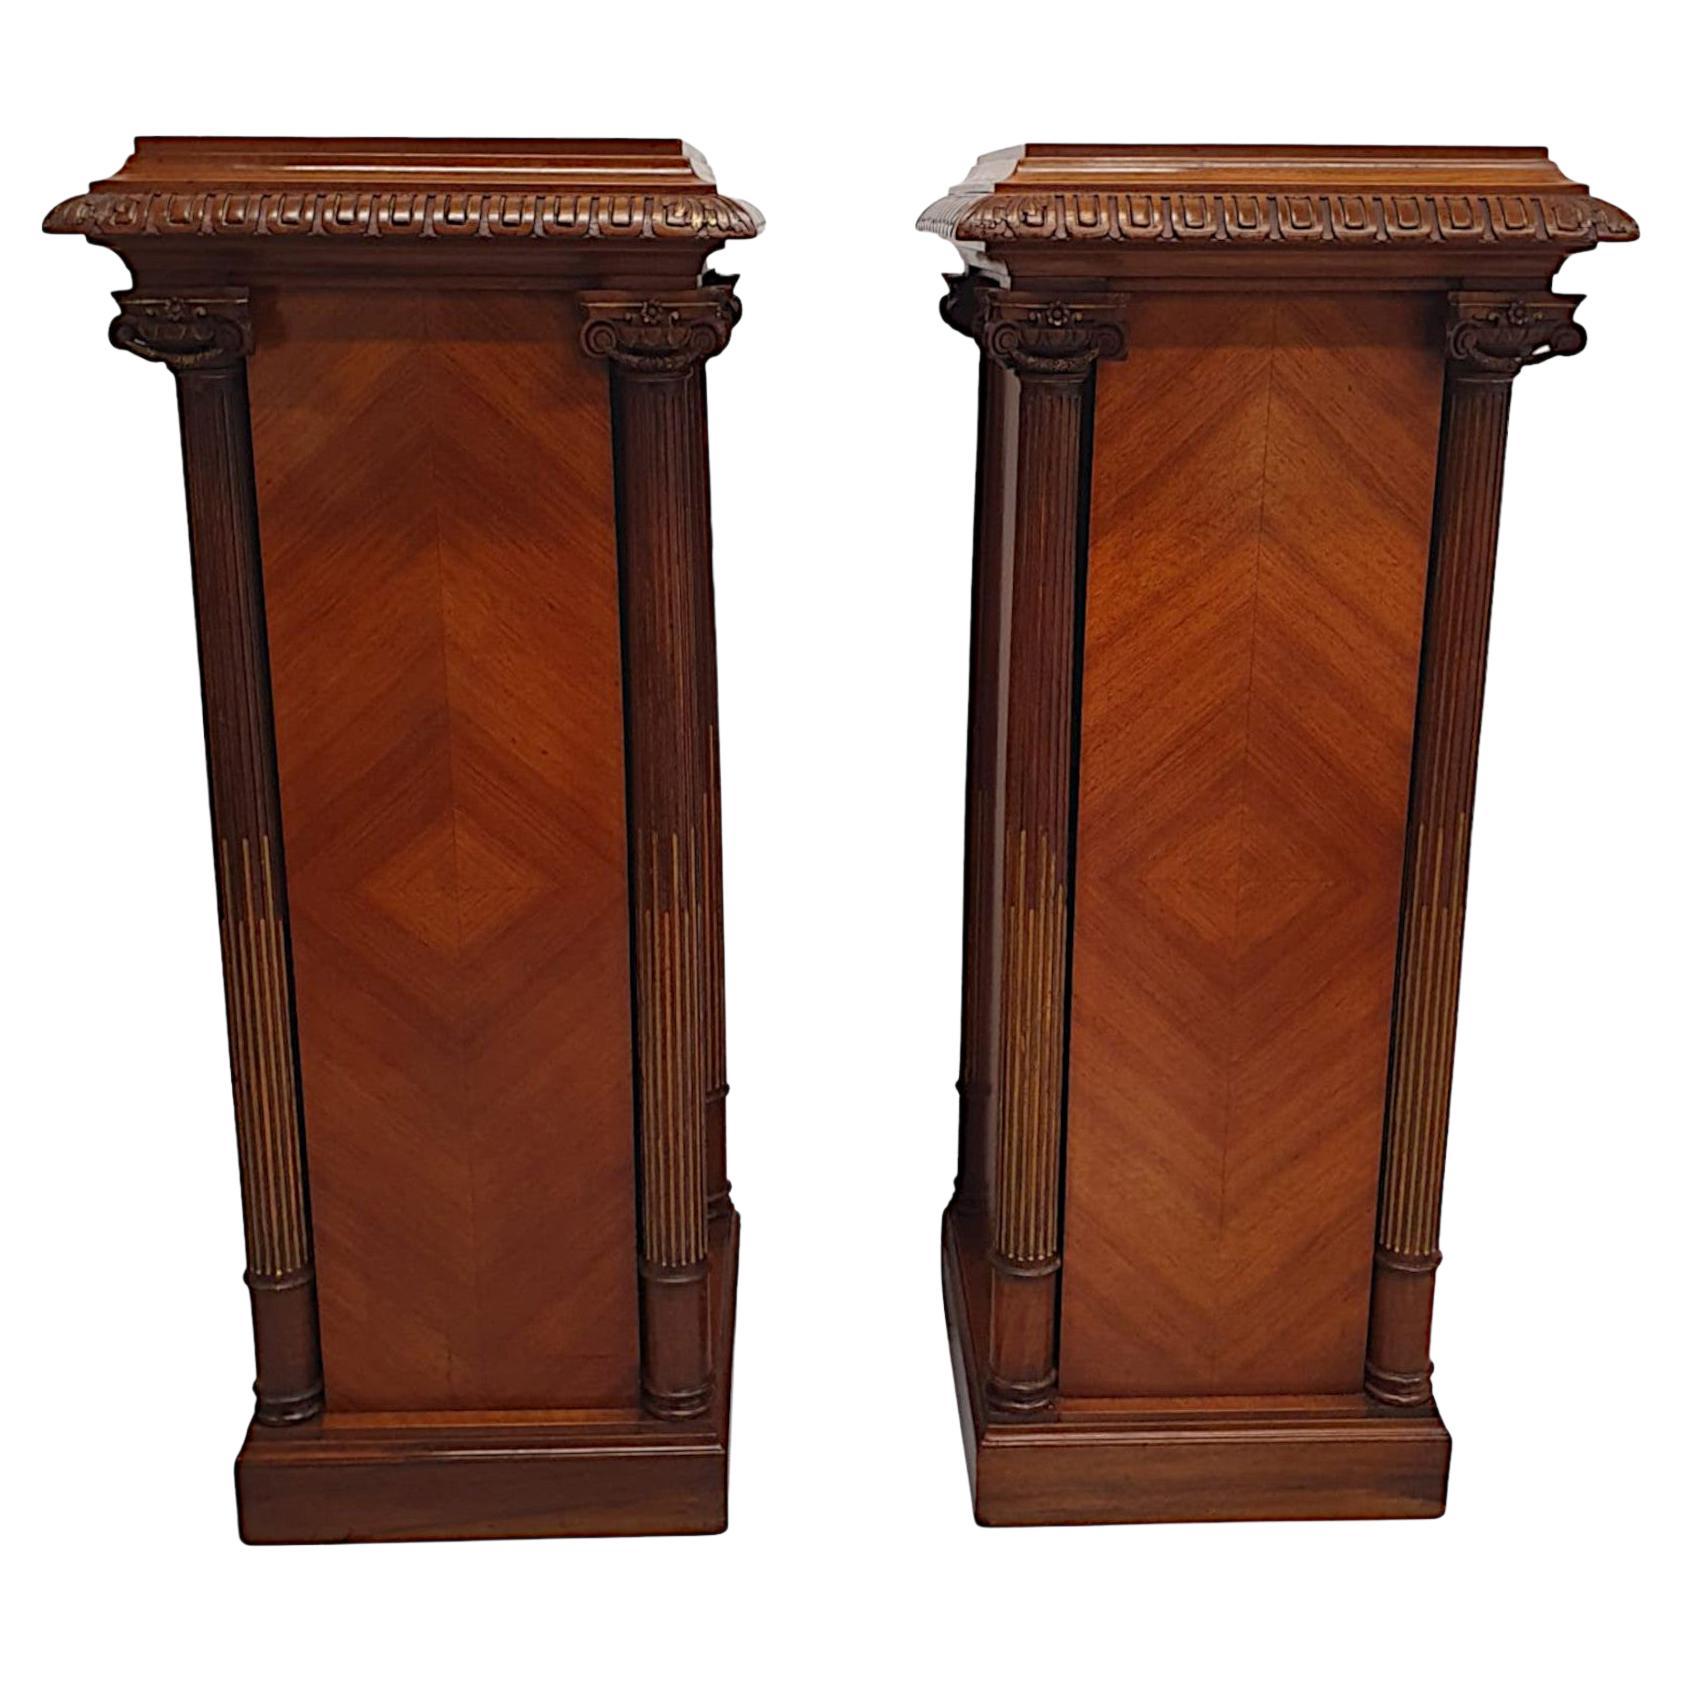  A Very Rare and Fine Pair of 19th Century Bust or Plant Stands  For Sale